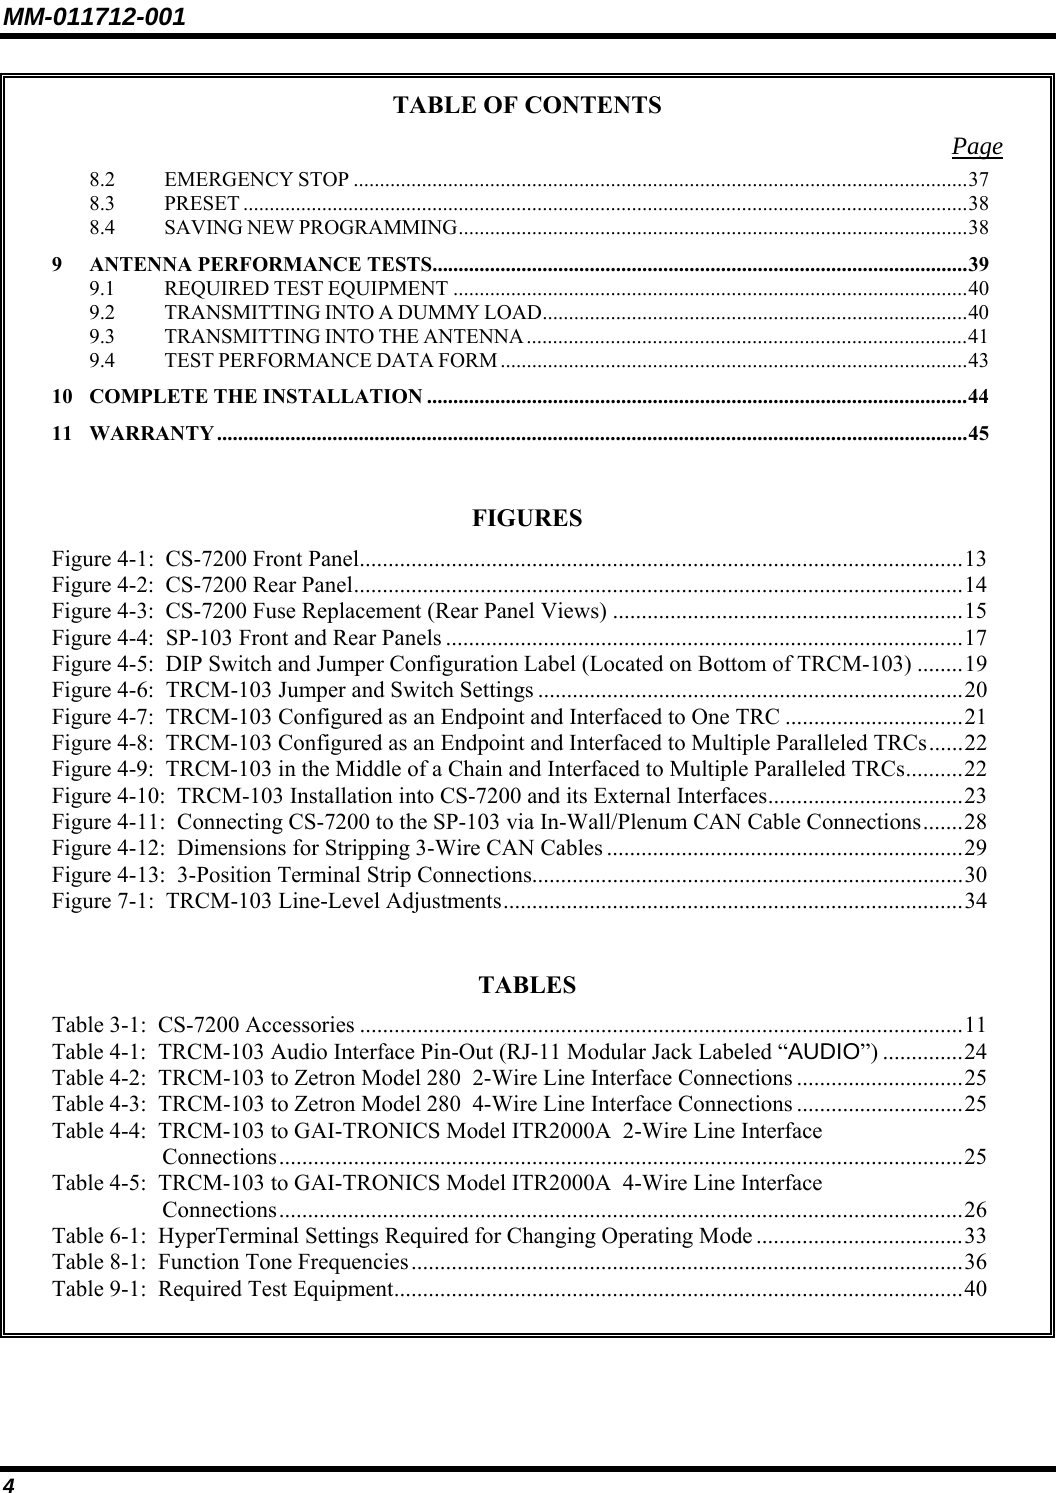 MM-011712-001 4 TABLE OF CONTENTS Page 8.2 EMERGENCY STOP .....................................................................................................................37 8.3 PRESET ..........................................................................................................................................38 8.4 SAVING NEW PROGRAMMING.................................................................................................38 9 ANTENNA PERFORMANCE TESTS......................................................................................................39 9.1 REQUIRED TEST EQUIPMENT ..................................................................................................40 9.2 TRANSMITTING INTO A DUMMY LOAD.................................................................................40 9.3 TRANSMITTING INTO THE ANTENNA ....................................................................................41 9.4 TEST PERFORMANCE DATA FORM .........................................................................................43 10 COMPLETE THE INSTALLATION .......................................................................................................44 11 WARRANTY ...............................................................................................................................................45  FIGURES Figure 4-1:  CS-7200 Front Panel.........................................................................................................13 Figure 4-2:  CS-7200 Rear Panel..........................................................................................................14 Figure 4-3:  CS-7200 Fuse Replacement (Rear Panel Views) .............................................................15 Figure 4-4:  SP-103 Front and Rear Panels ..........................................................................................17 Figure 4-5:  DIP Switch and Jumper Configuration Label (Located on Bottom of TRCM-103) ........19 Figure 4-6:  TRCM-103 Jumper and Switch Settings ..........................................................................20 Figure 4-7:  TRCM-103 Configured as an Endpoint and Interfaced to One TRC ...............................21 Figure 4-8:  TRCM-103 Configured as an Endpoint and Interfaced to Multiple Paralleled TRCs......22 Figure 4-9:  TRCM-103 in the Middle of a Chain and Interfaced to Multiple Paralleled TRCs..........22 Figure 4-10:  TRCM-103 Installation into CS-7200 and its External Interfaces..................................23 Figure 4-11:  Connecting CS-7200 to the SP-103 via In-Wall/Plenum CAN Cable Connections.......28 Figure 4-12:  Dimensions for Stripping 3-Wire CAN Cables ..............................................................29 Figure 4-13:  3-Position Terminal Strip Connections...........................................................................30 Figure 7-1:  TRCM-103 Line-Level Adjustments................................................................................34  TABLES Table 3-1:  CS-7200 Accessories .........................................................................................................11 Table 4-1:  TRCM-103 Audio Interface Pin-Out (RJ-11 Modular Jack Labeled “AUDIO”) ..............24 Table 4-2:  TRCM-103 to Zetron Model 280  2-Wire Line Interface Connections .............................25 Table 4-3:  TRCM-103 to Zetron Model 280  4-Wire Line Interface Connections .............................25 Table 4-4:  TRCM-103 to GAI-TRONICS Model ITR2000A  2-Wire Line Interface Connections.......................................................................................................................25 Table 4-5:  TRCM-103 to GAI-TRONICS Model ITR2000A  4-Wire Line Interface Connections.......................................................................................................................26 Table 6-1:  HyperTerminal Settings Required for Changing Operating Mode ....................................33 Table 8-1:  Function Tone Frequencies................................................................................................36 Table 9-1:  Required Test Equipment...................................................................................................40  